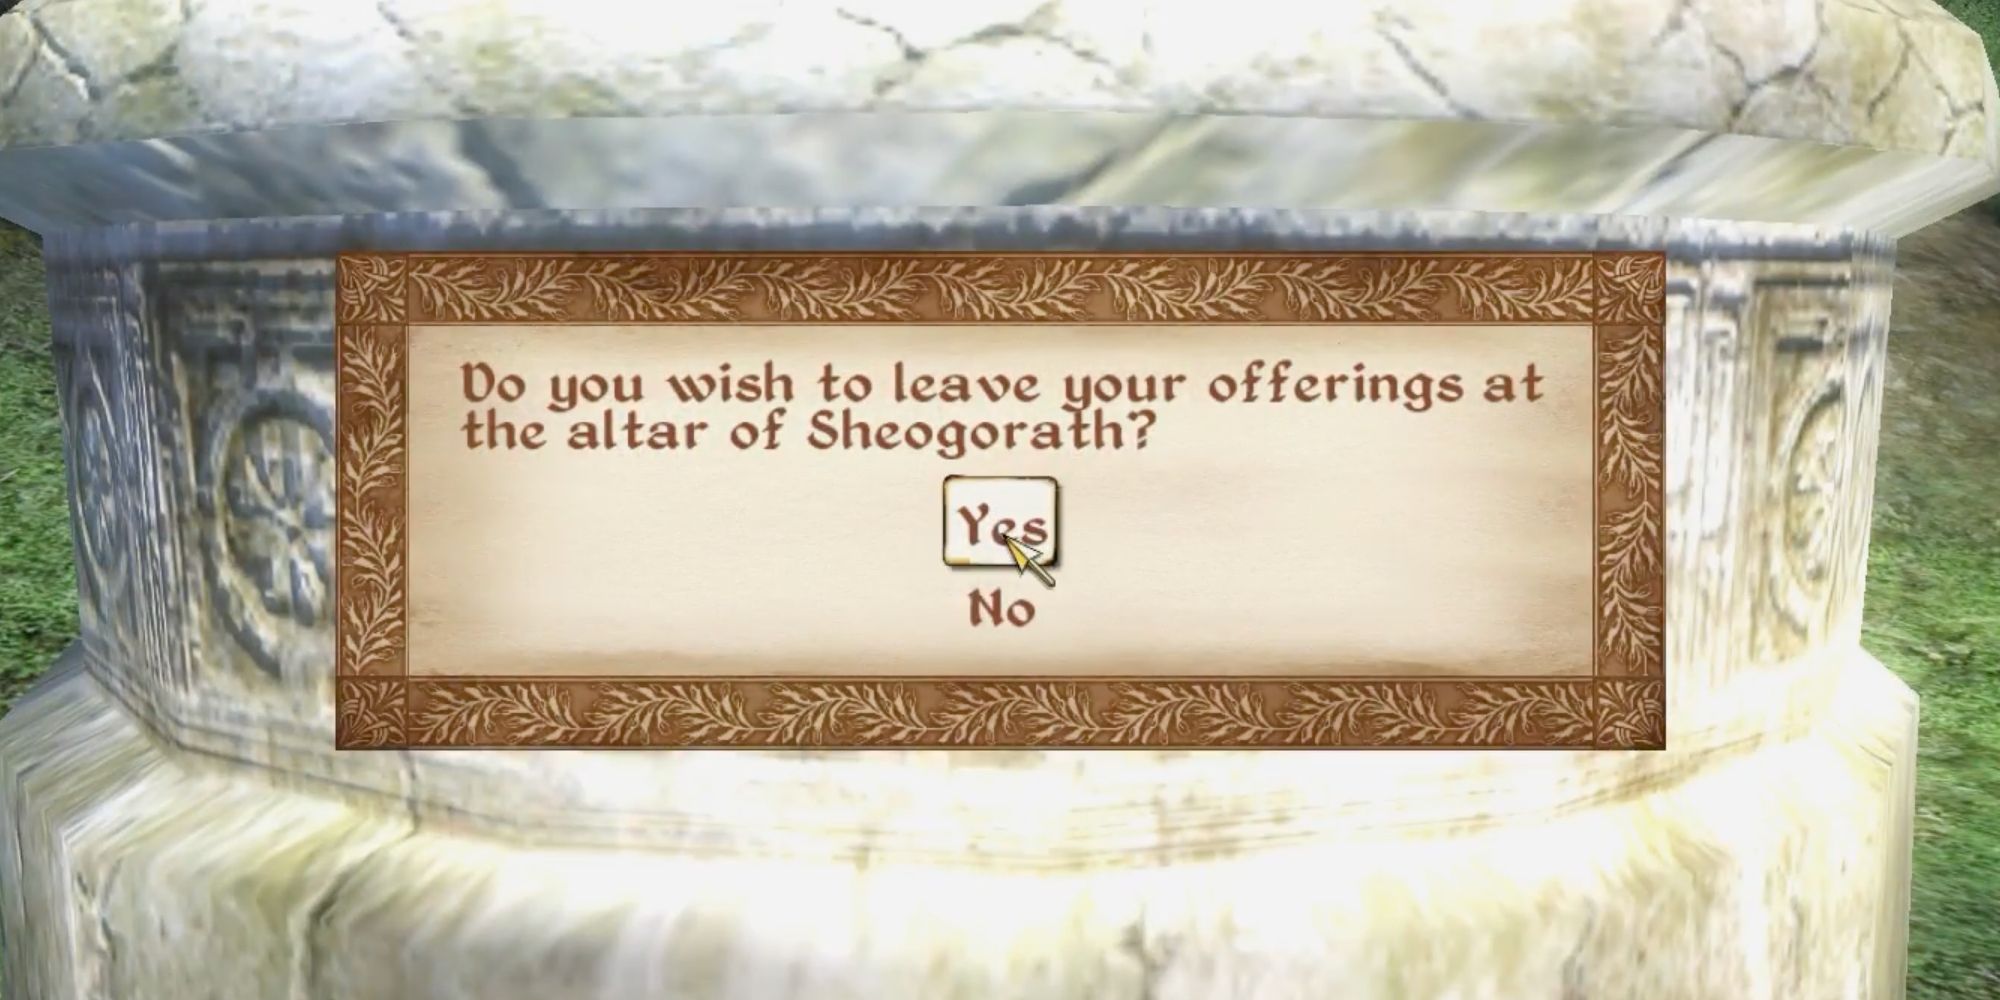 A screenshot of Oblivion, showing the Hero leaving an offering at the altar of Sheogorath to initiate the Sheogorath quest